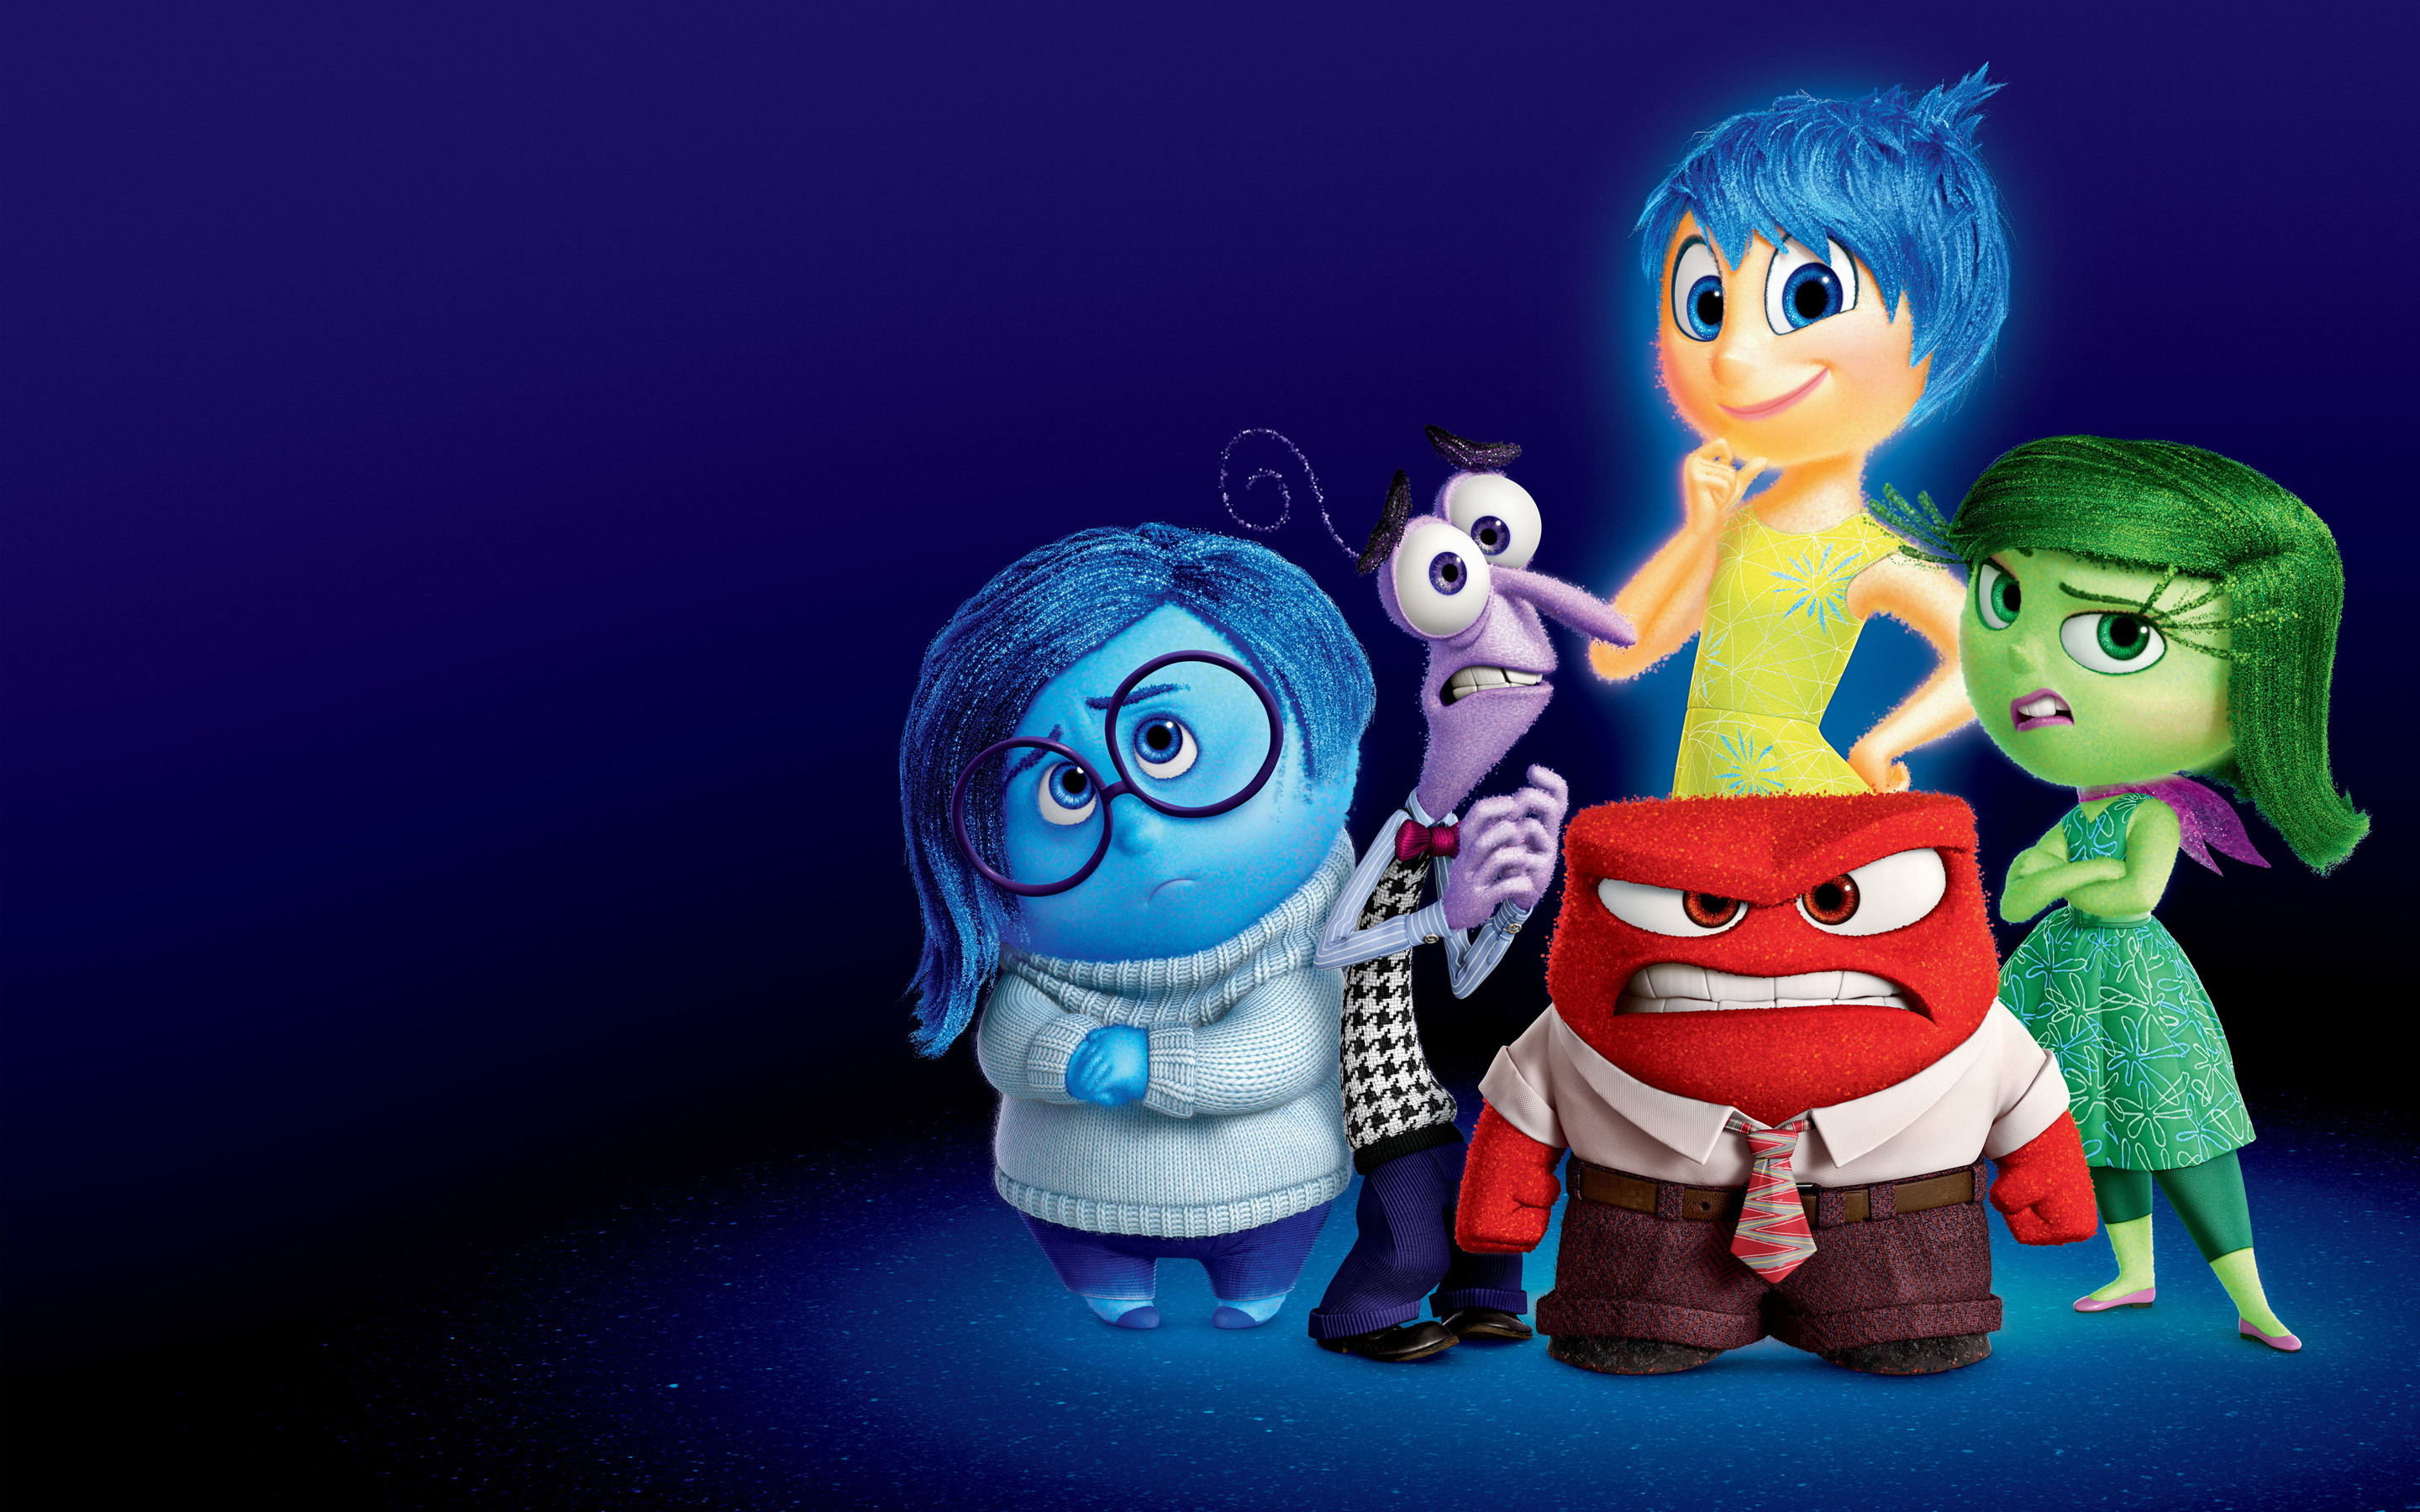 2880x1800 Feelings During Finals Week According To Inside Out